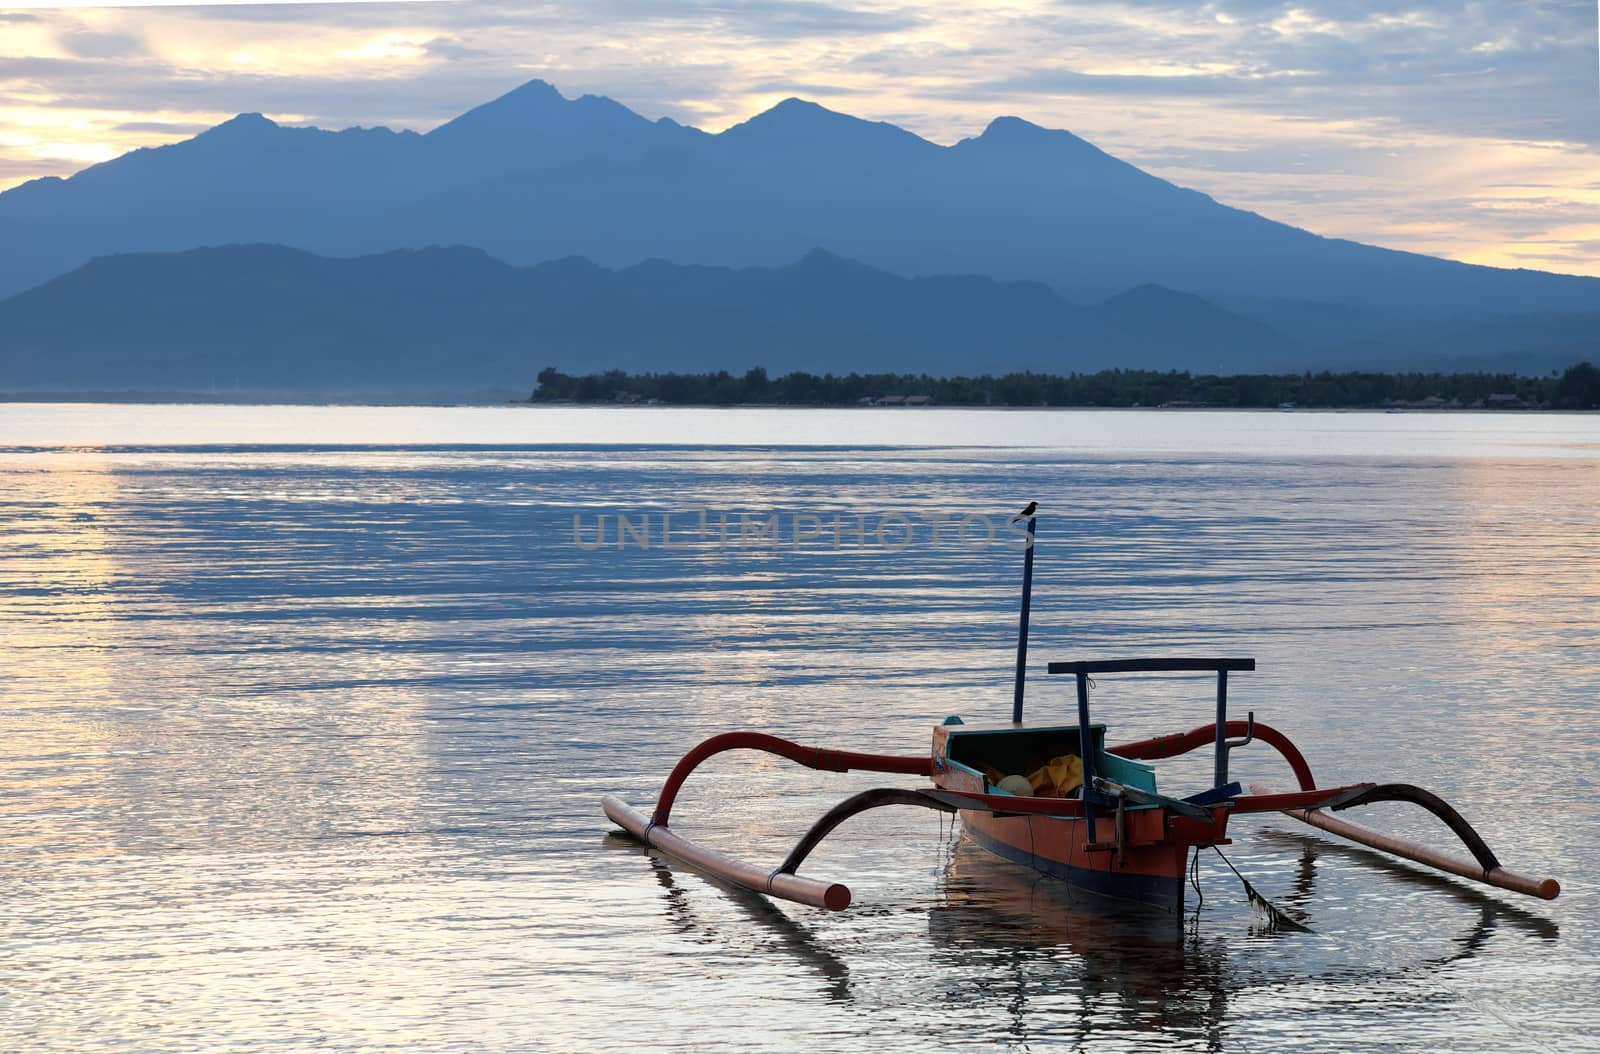 Fisherman boat with lombok volcano Rinjani in the background before the sunrise by rainfallsup